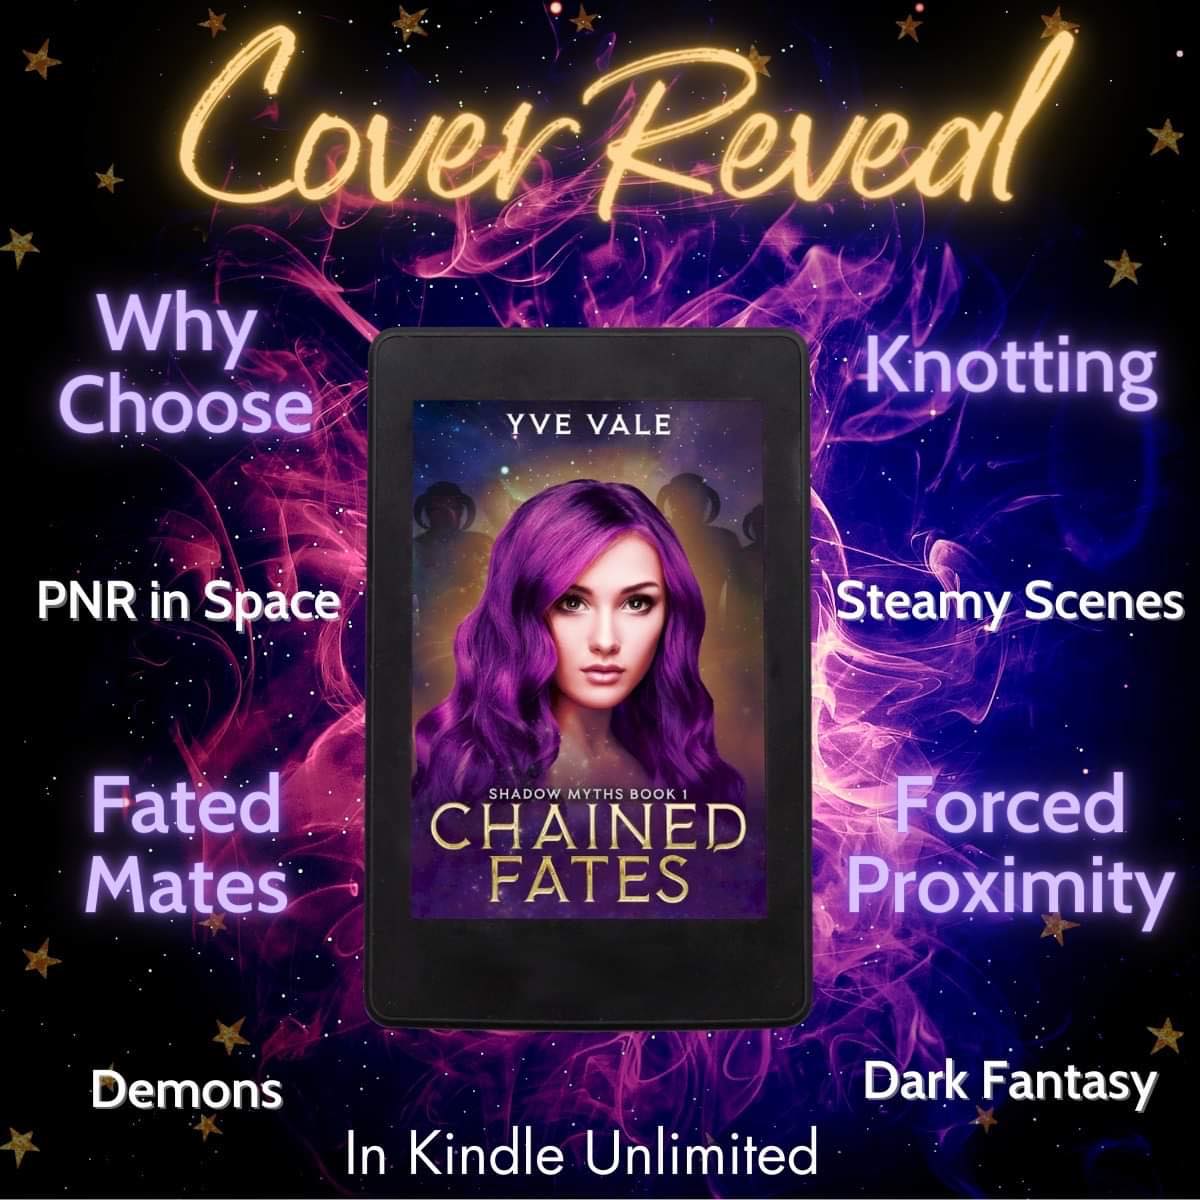 Chained Fates by Yve Vale
yvevale.com/chainedfates

#YveVale #ChainedFates #ShadowMyths #WhyChoose #WhyChooseRomanceReads #WhyChooseRomance #DemonRomance #AngelRomance #SpaceRomance #Bookboyfriend #SciFiRomance #paranormalromance @DarcyBennettPA